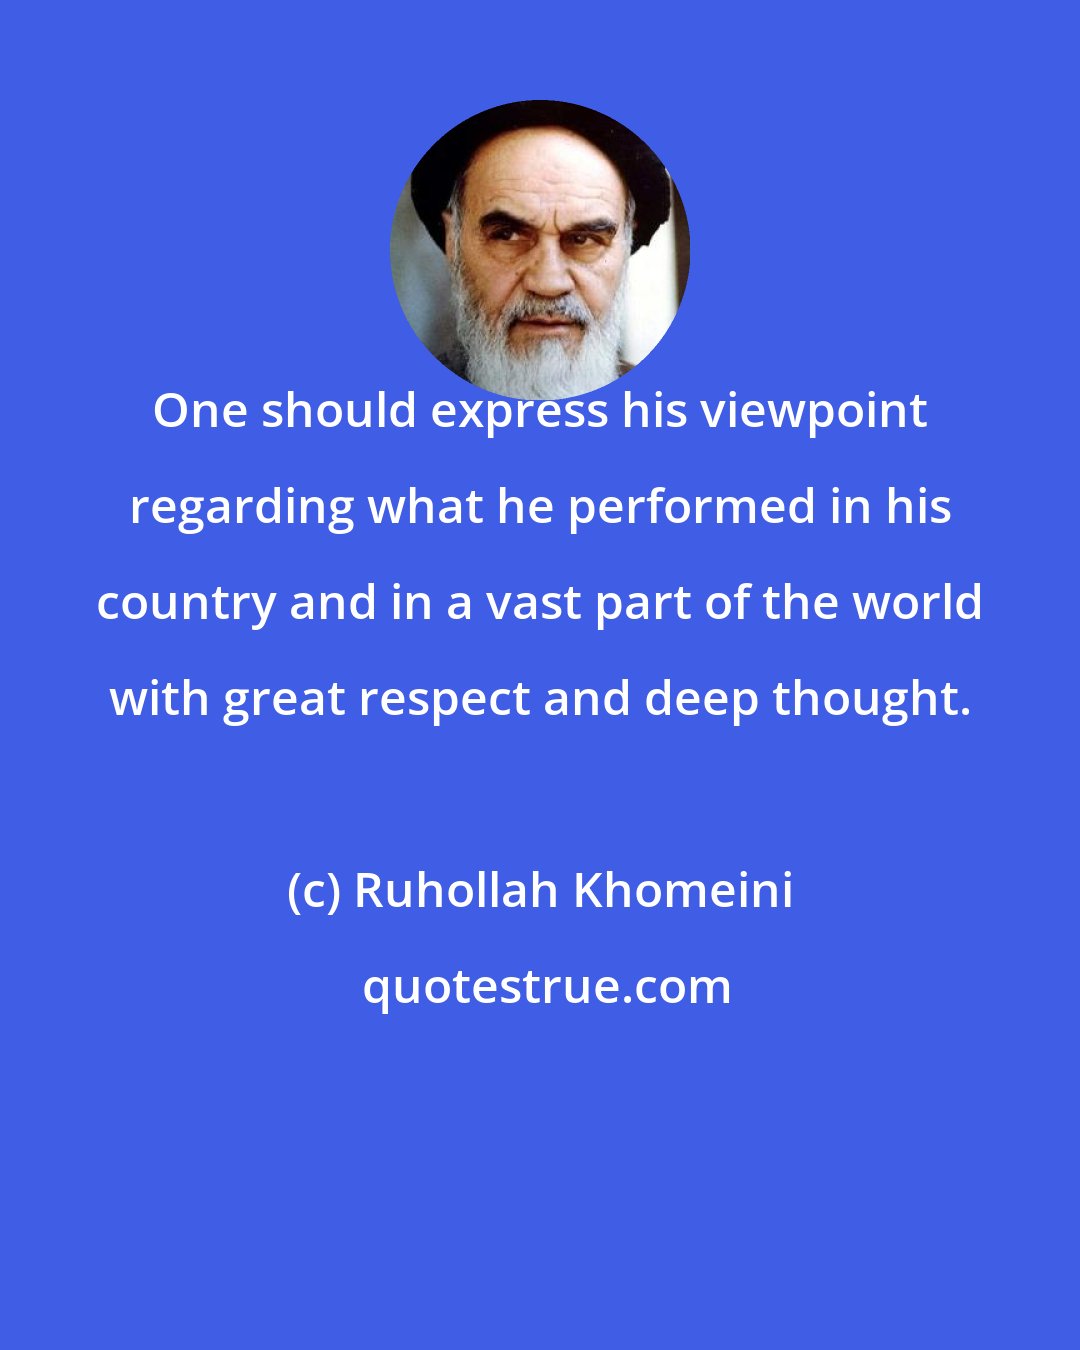 Ruhollah Khomeini: One should express his viewpoint regarding what he performed in his country and in a vast part of the world with great respect and deep thought.